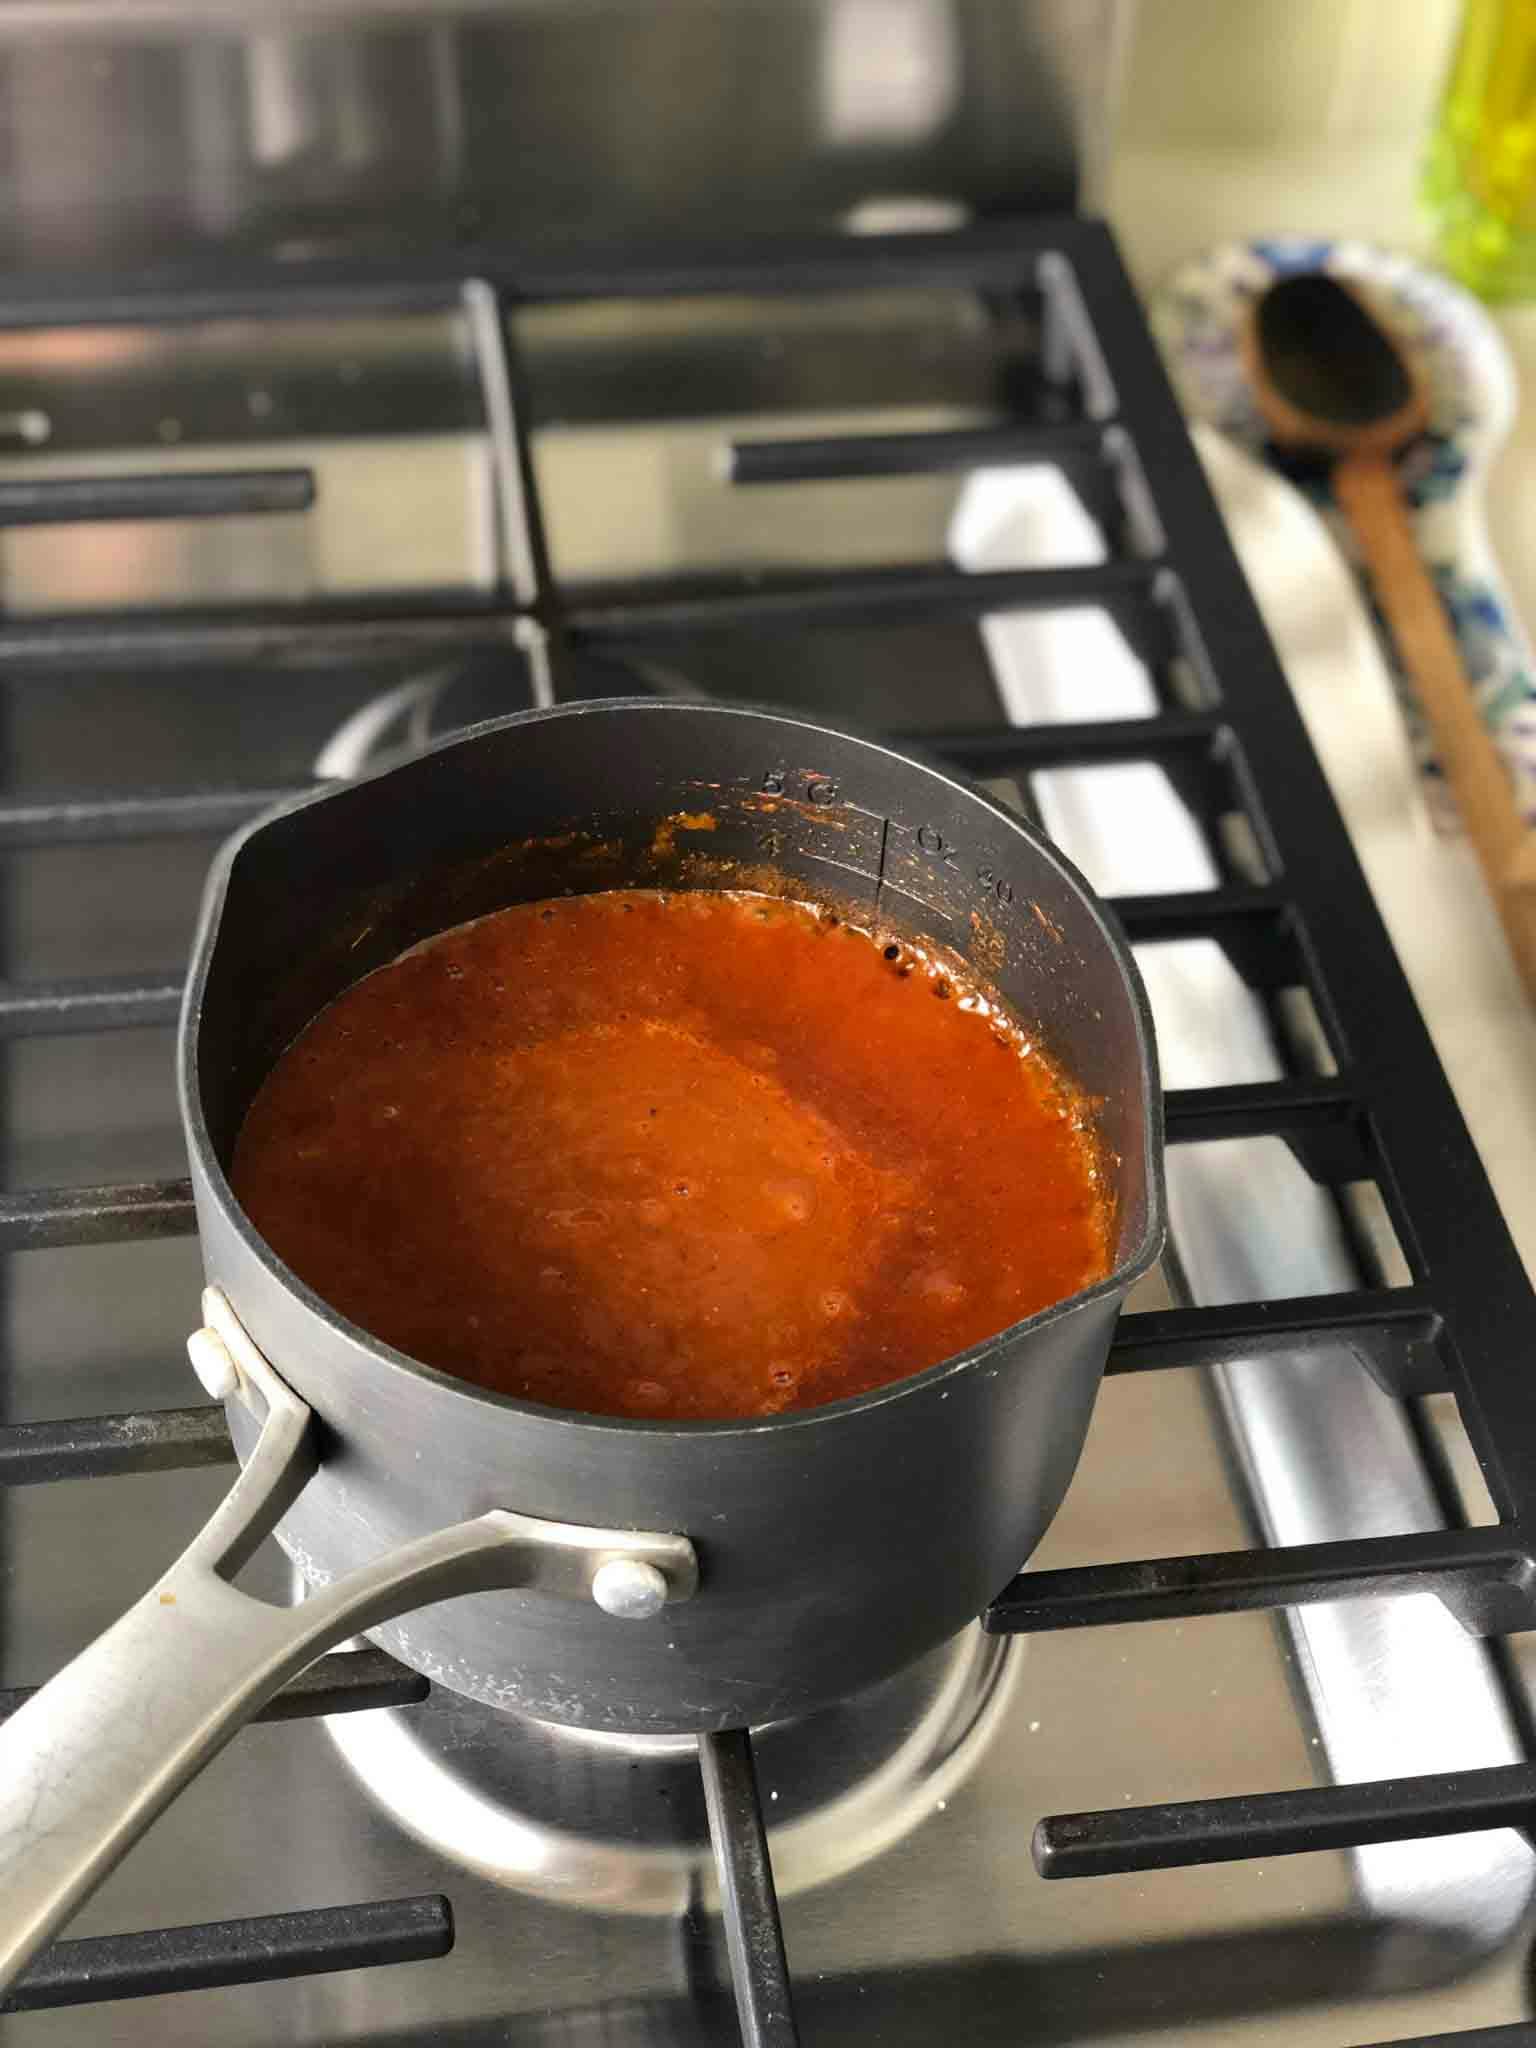 Enchilada sauce cooking in sauce pan on the stove.